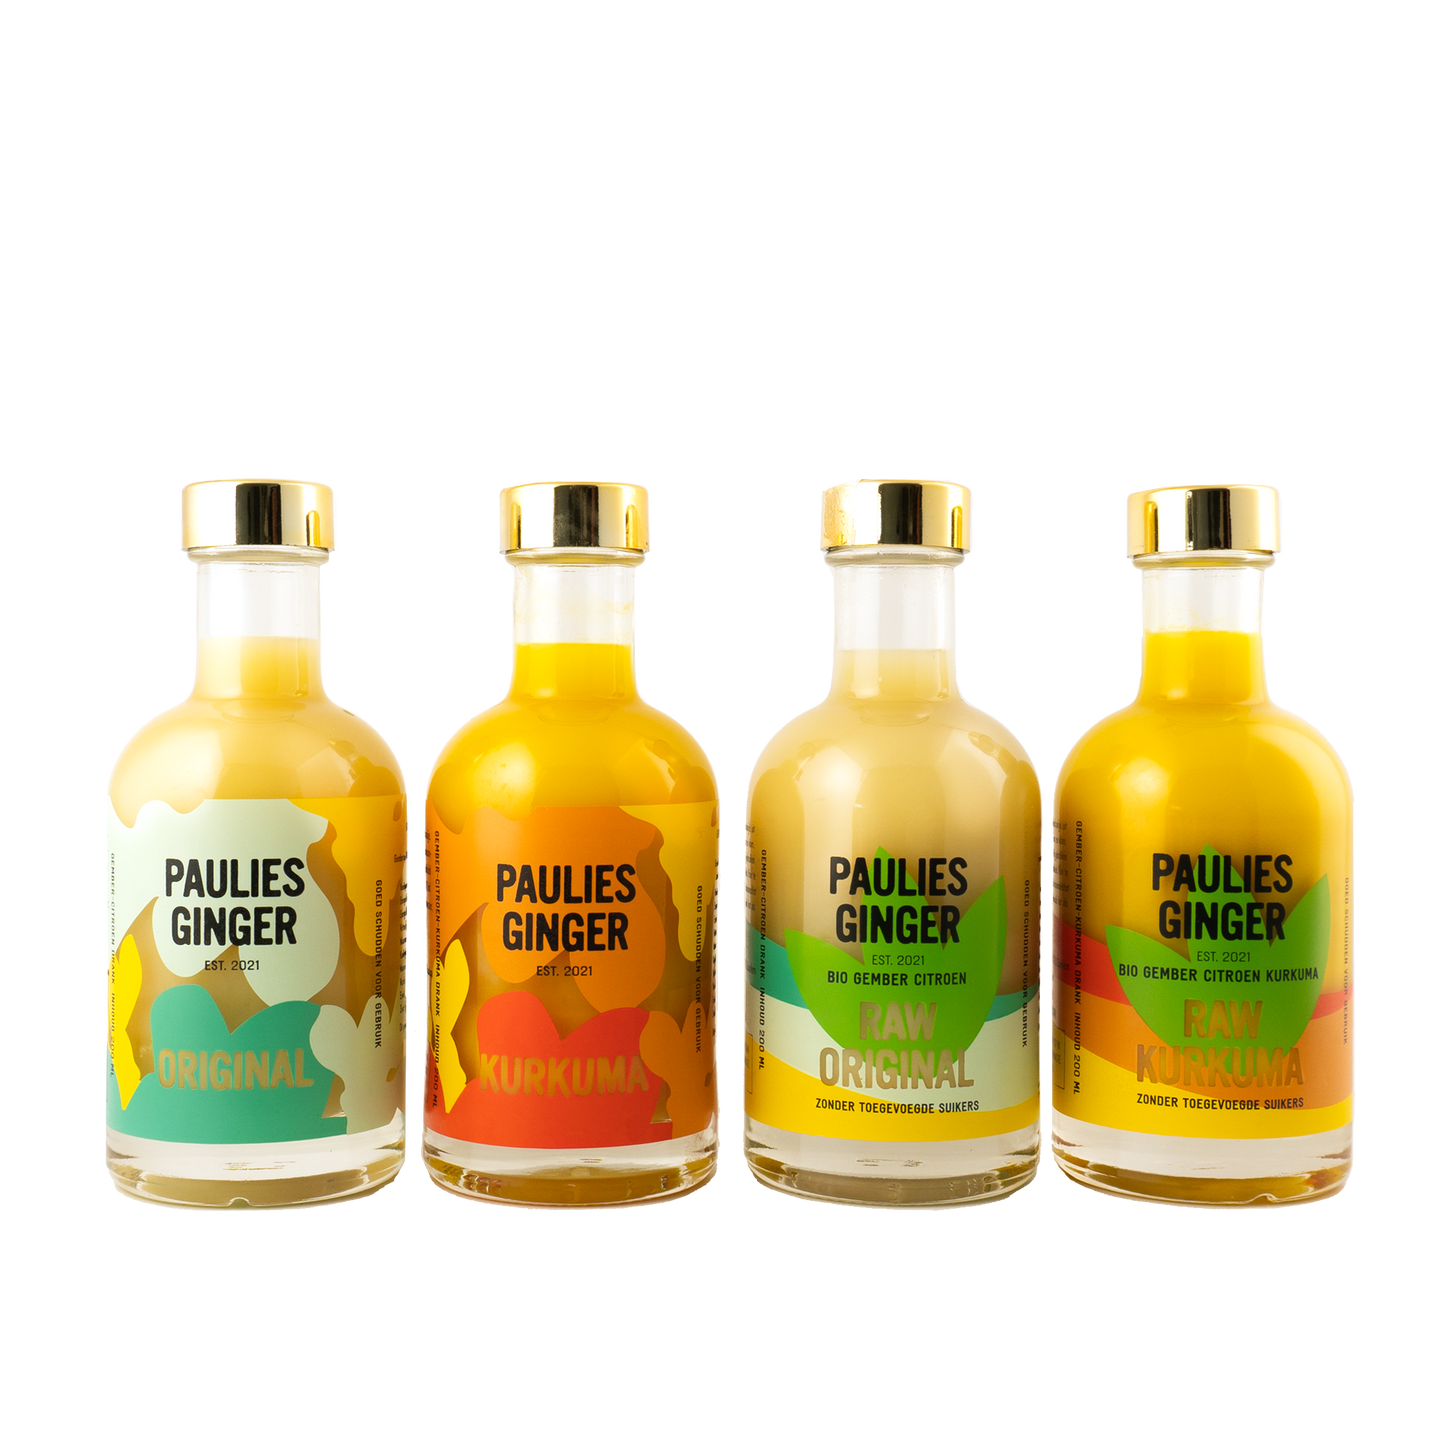  Proefpakket 4x - 200ml by Paulies Ginger  sold by Paulies Ginger 